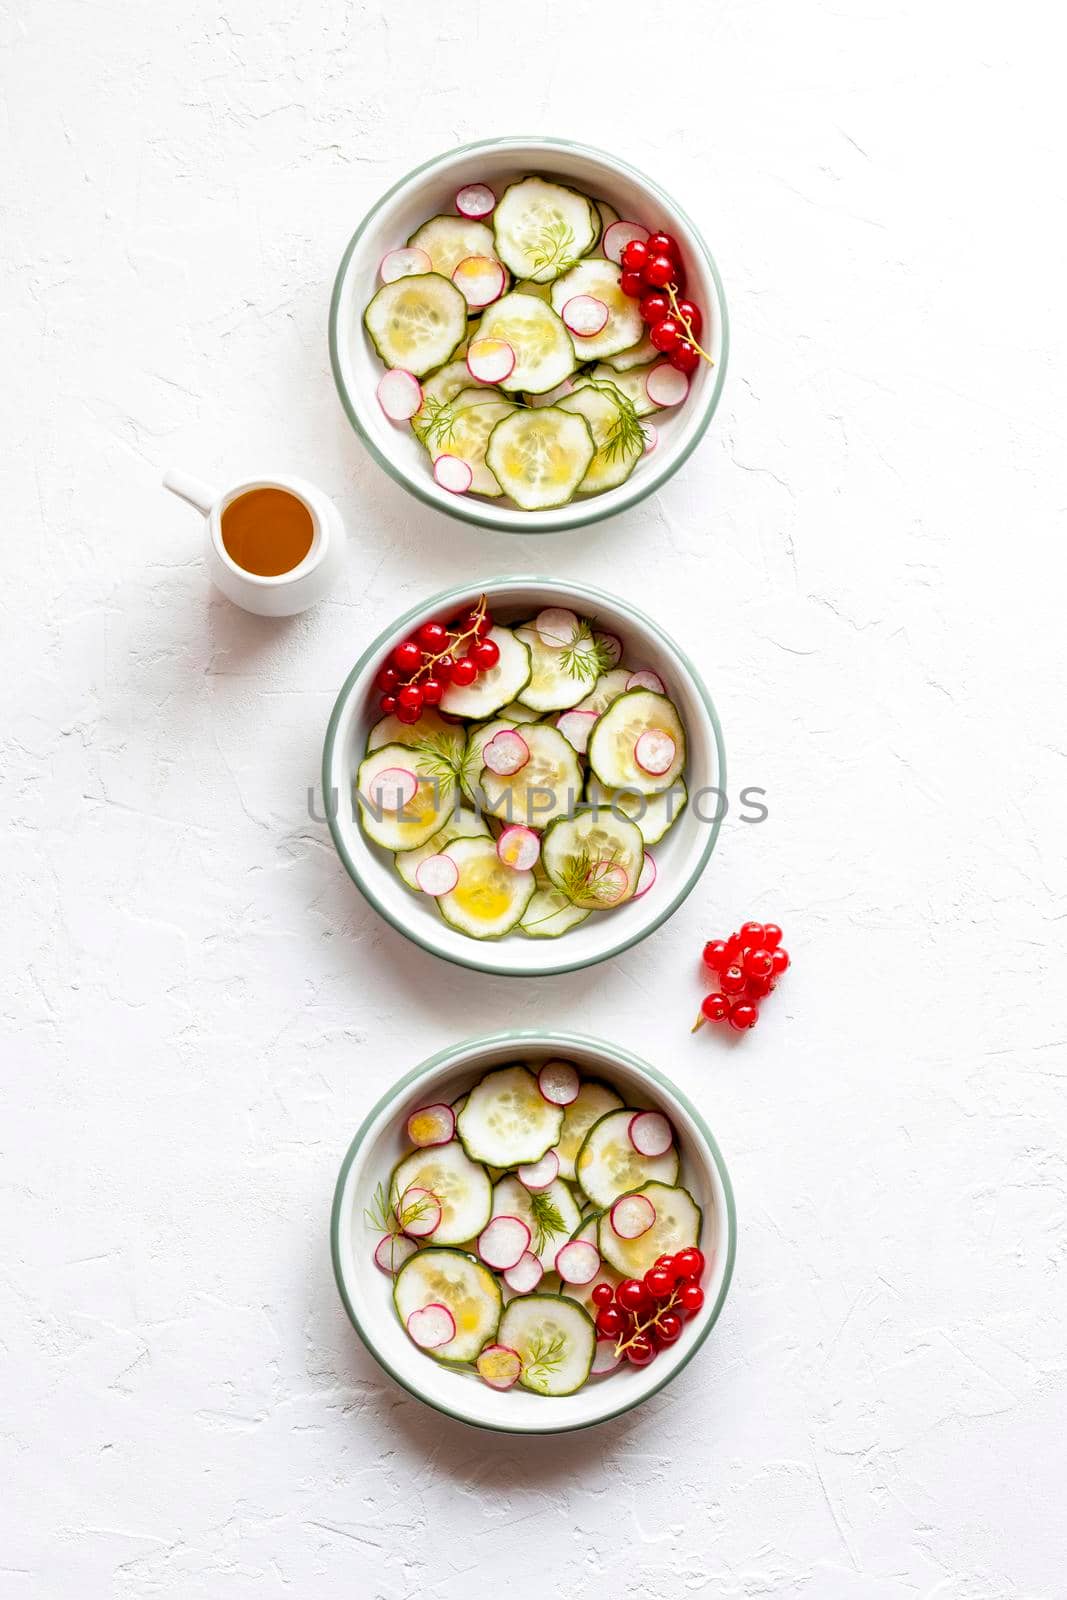 cucumber and radish cold salad served in three bowls and decorated with dill and red currants, top view